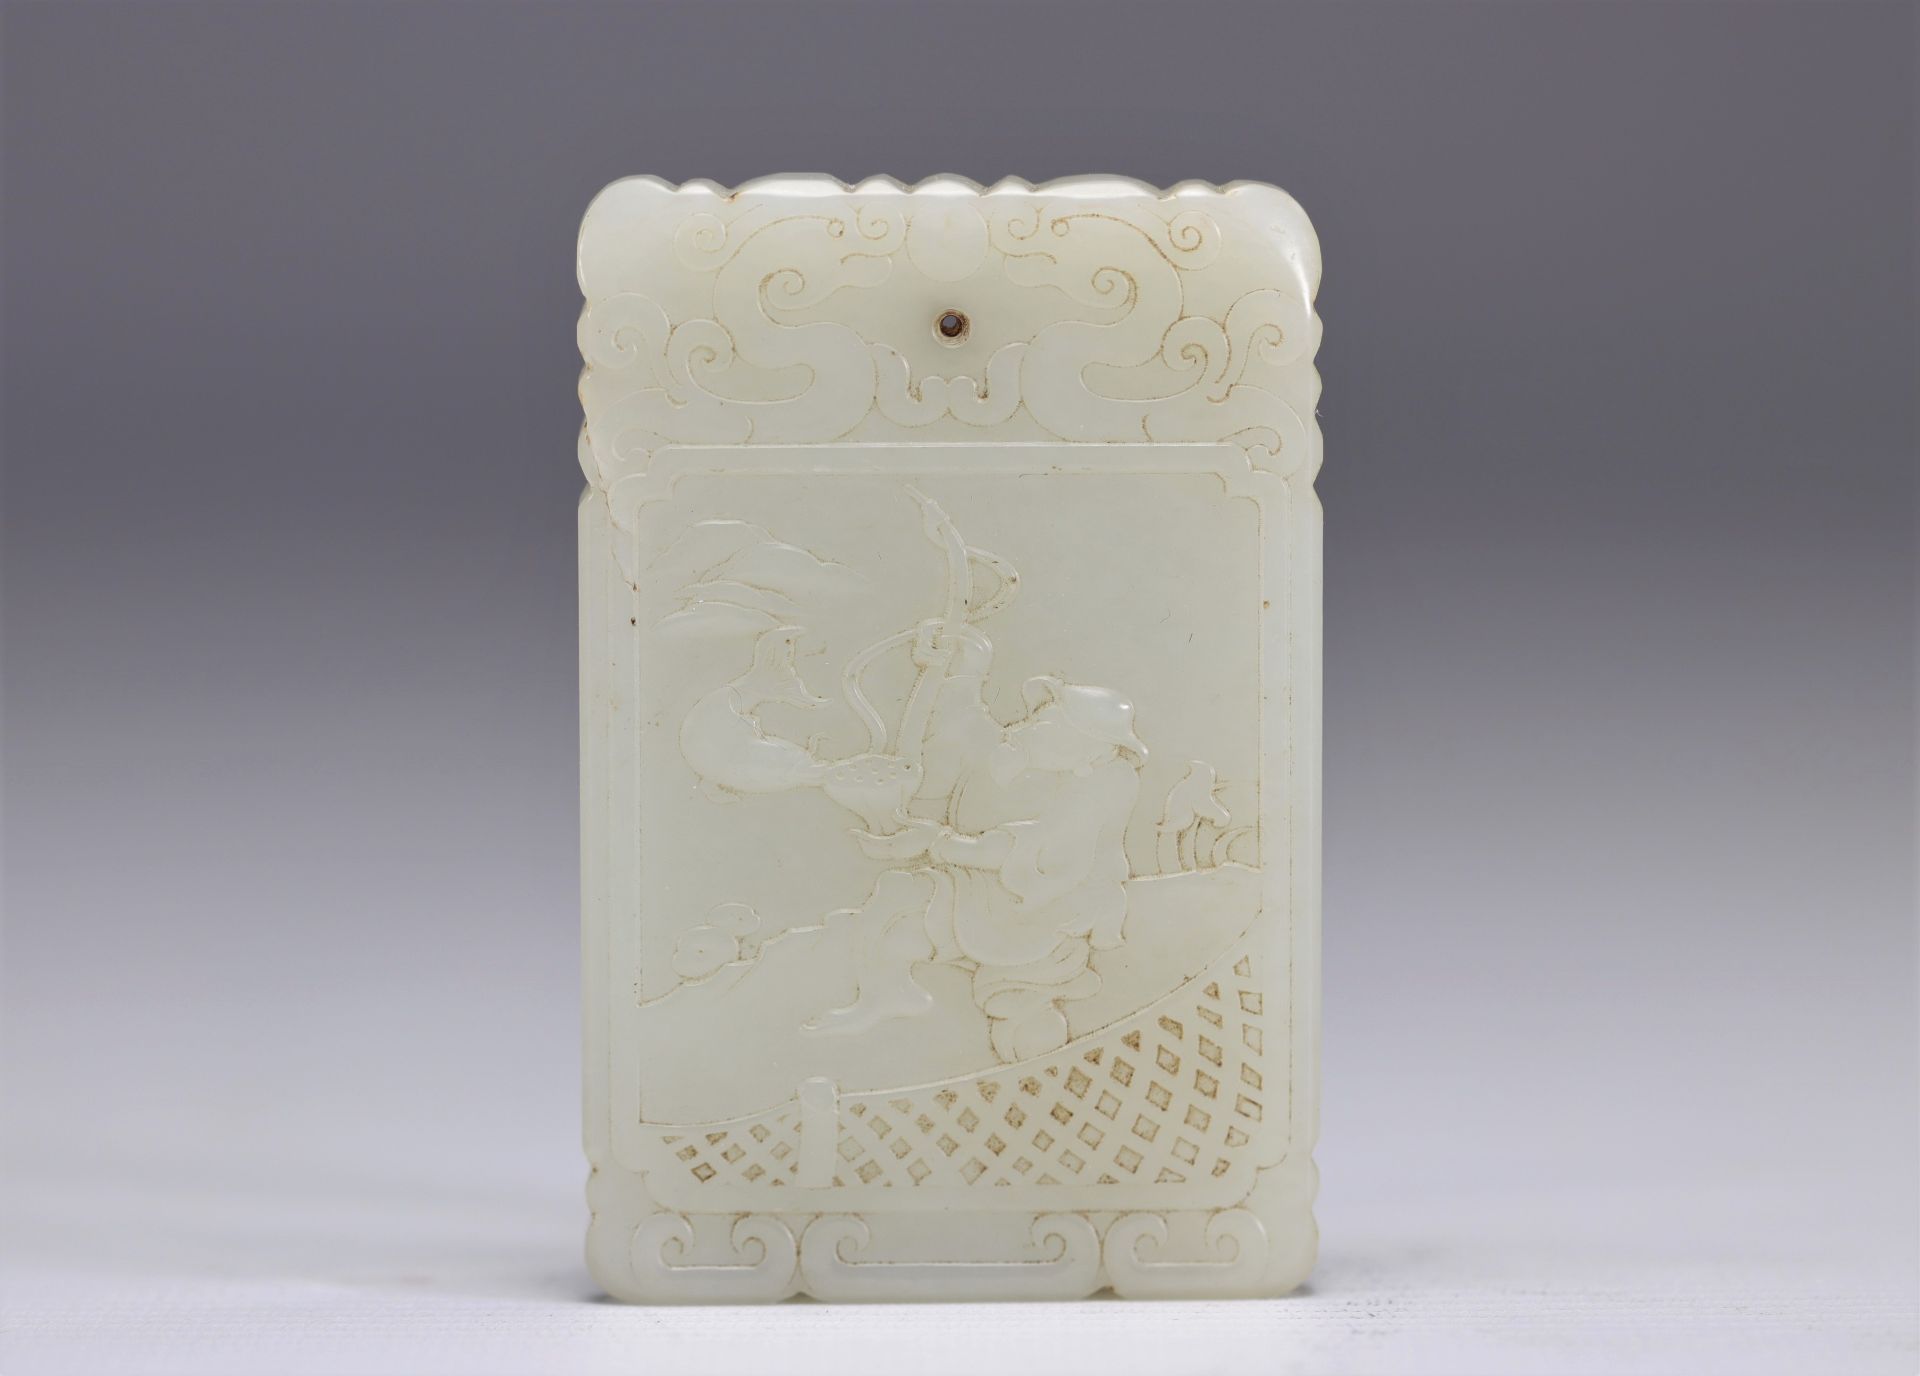 Rectangular white jade pendant carved in bas-relief on both sides with a fisherman on one side and c - Image 2 of 3